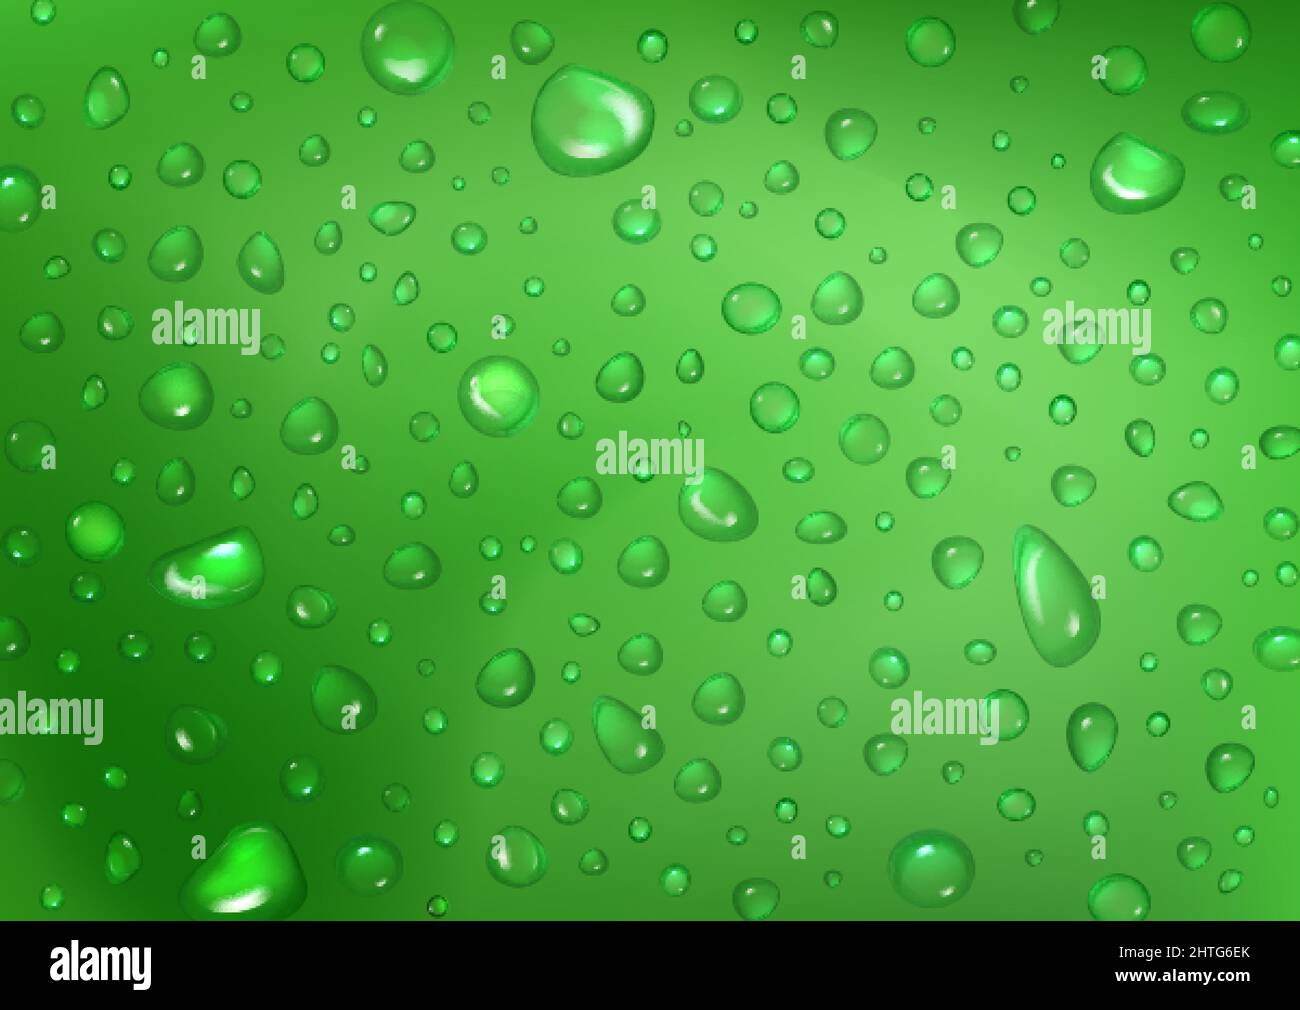 Fresh water drops on green abstract background. Drop wet texture or ...